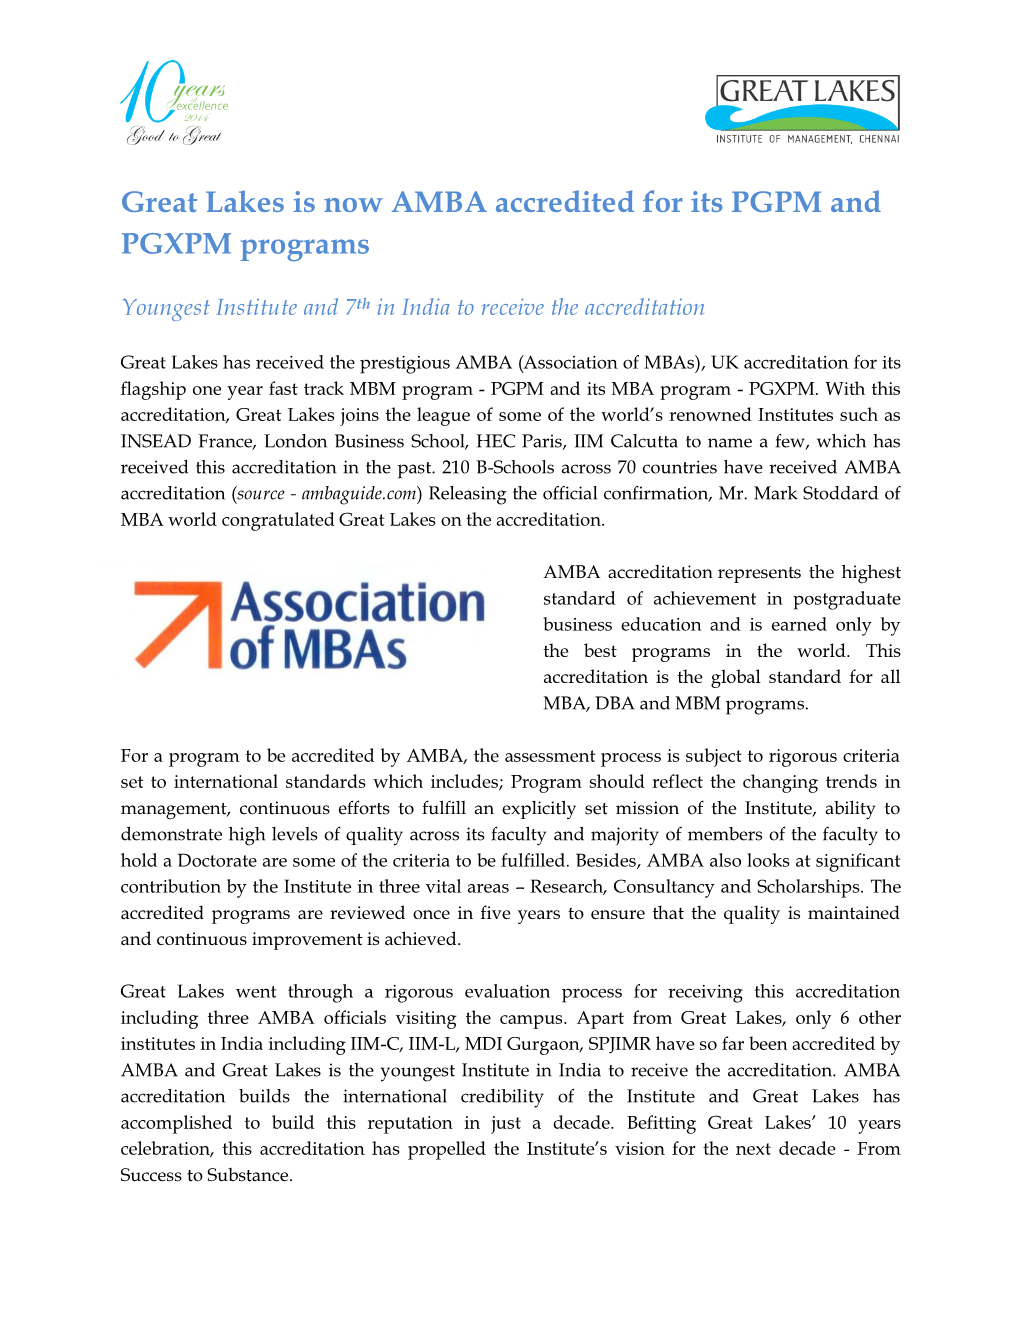 Great Lakes Is Now AMBA Accredited for Its PGPM and PGXPM Programs